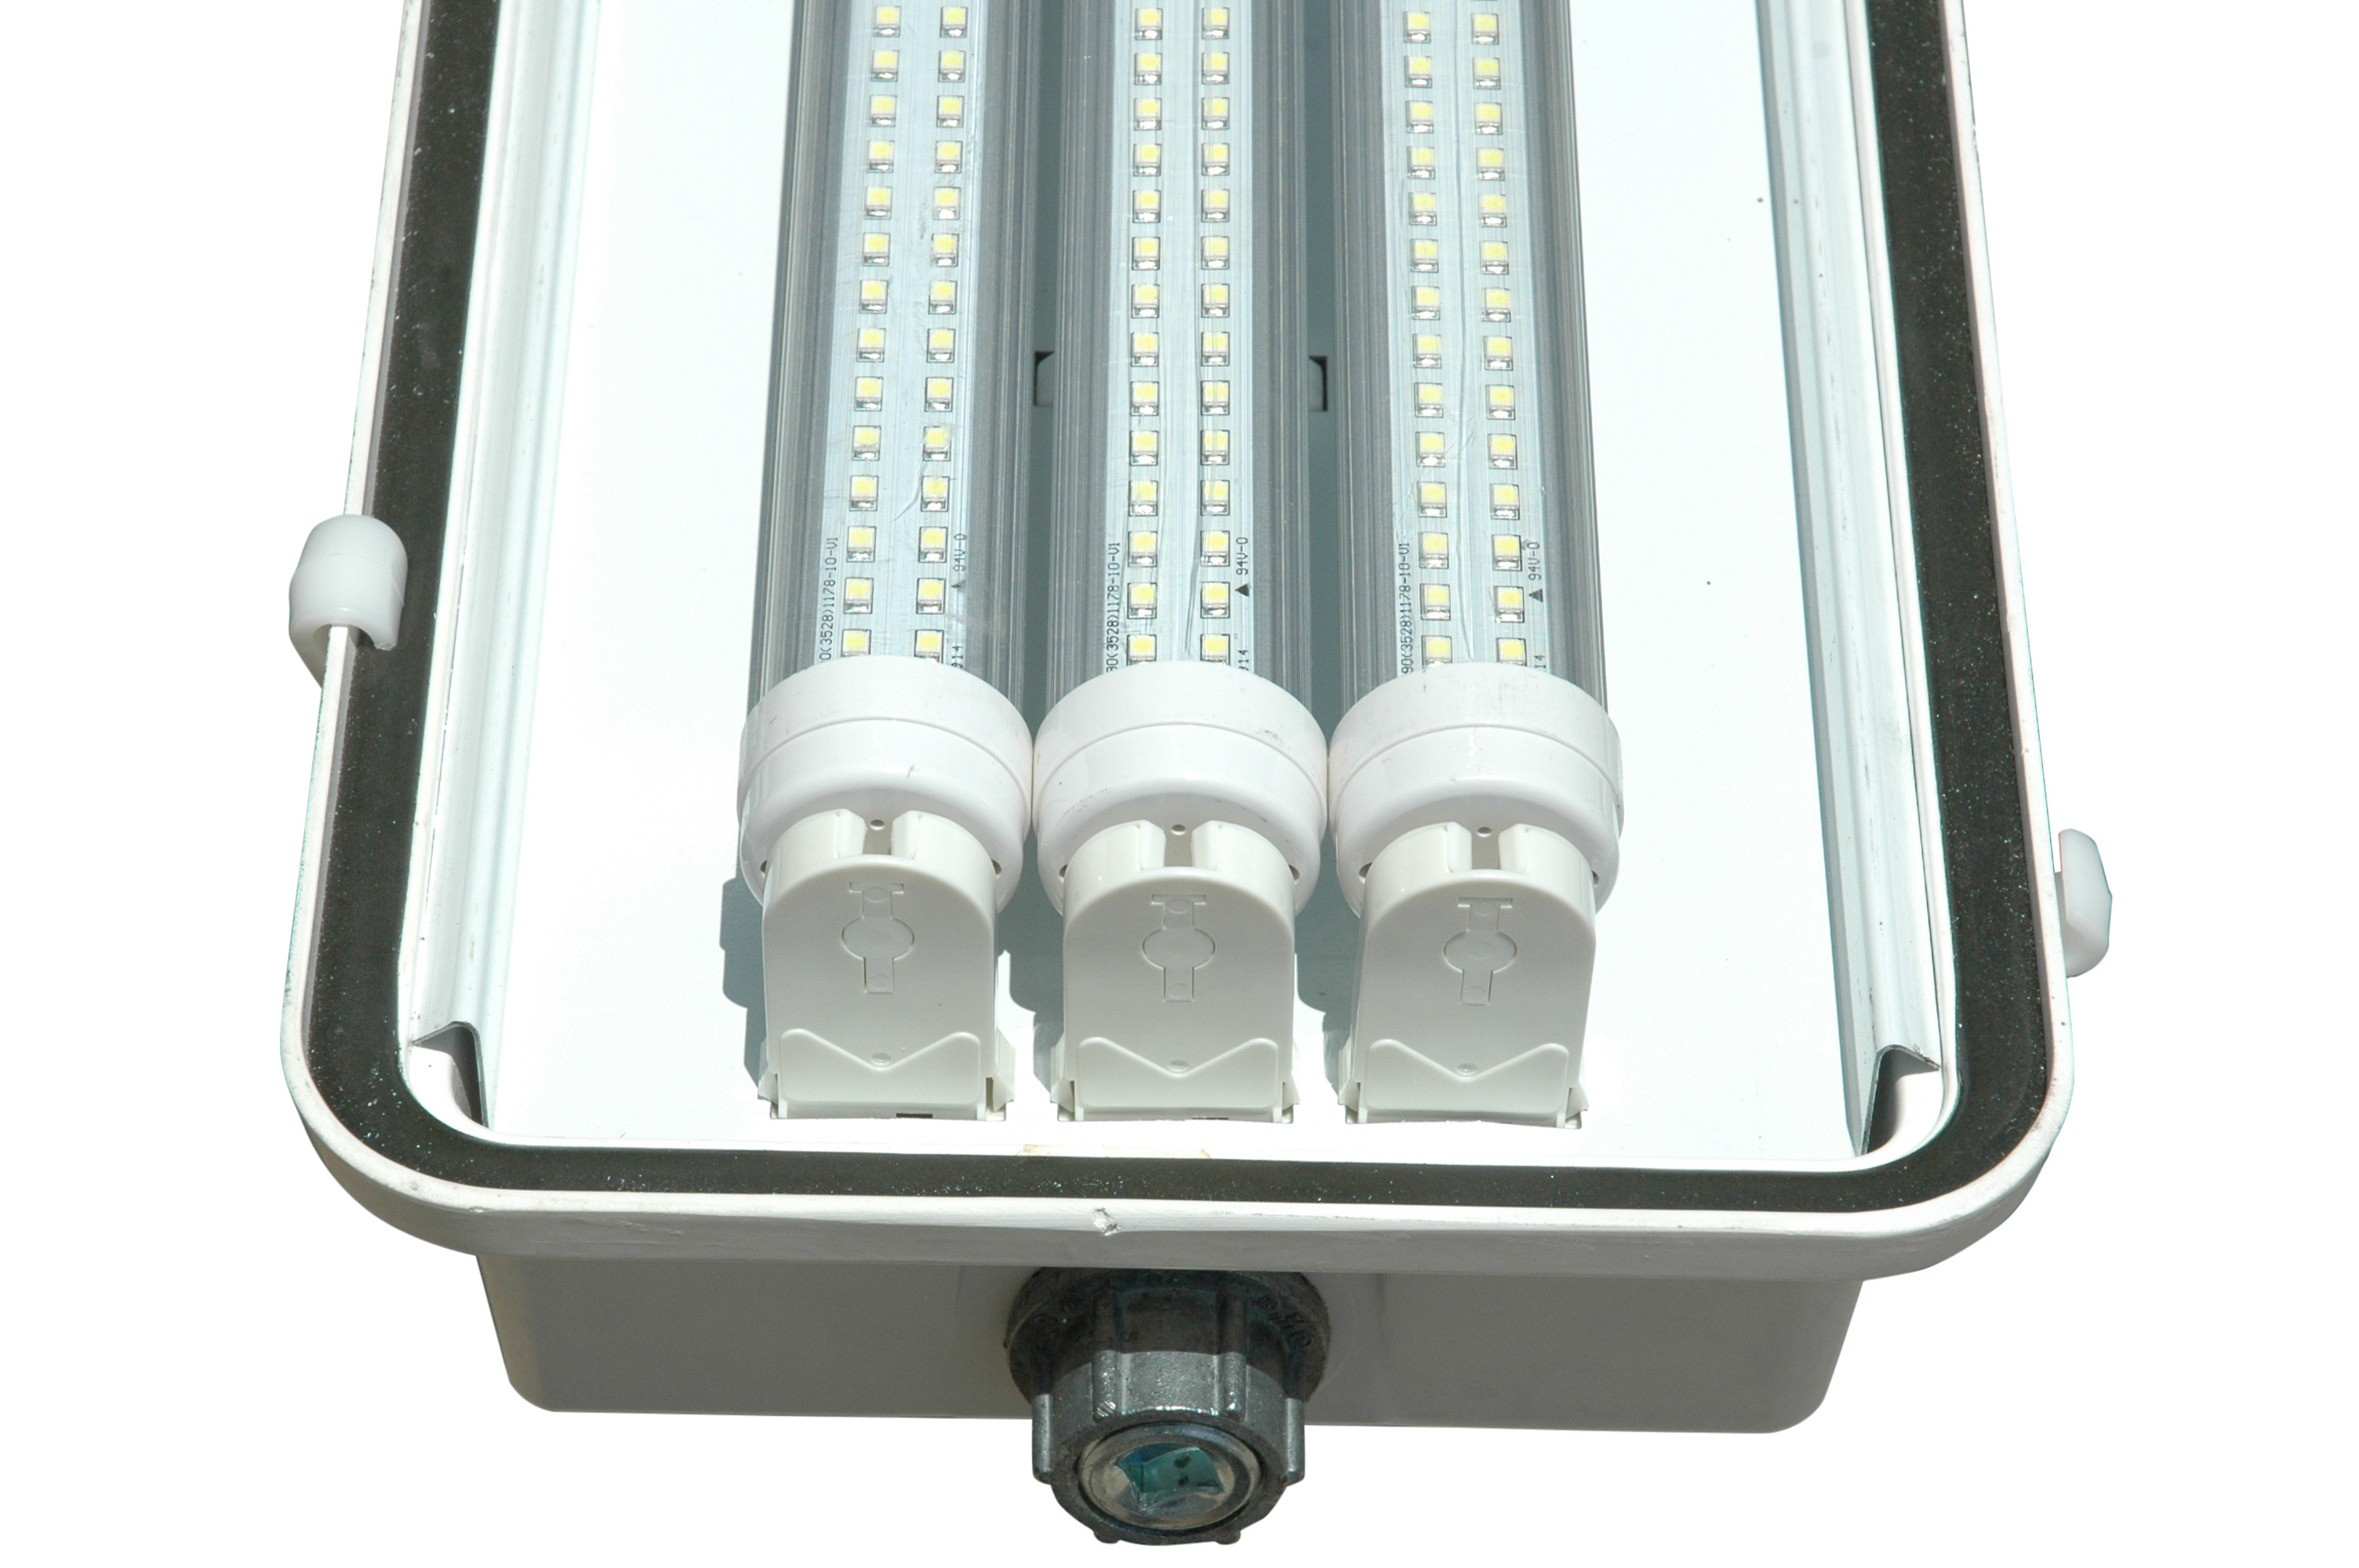 Larson Electronics Releases Explosion Proof LED Light ...